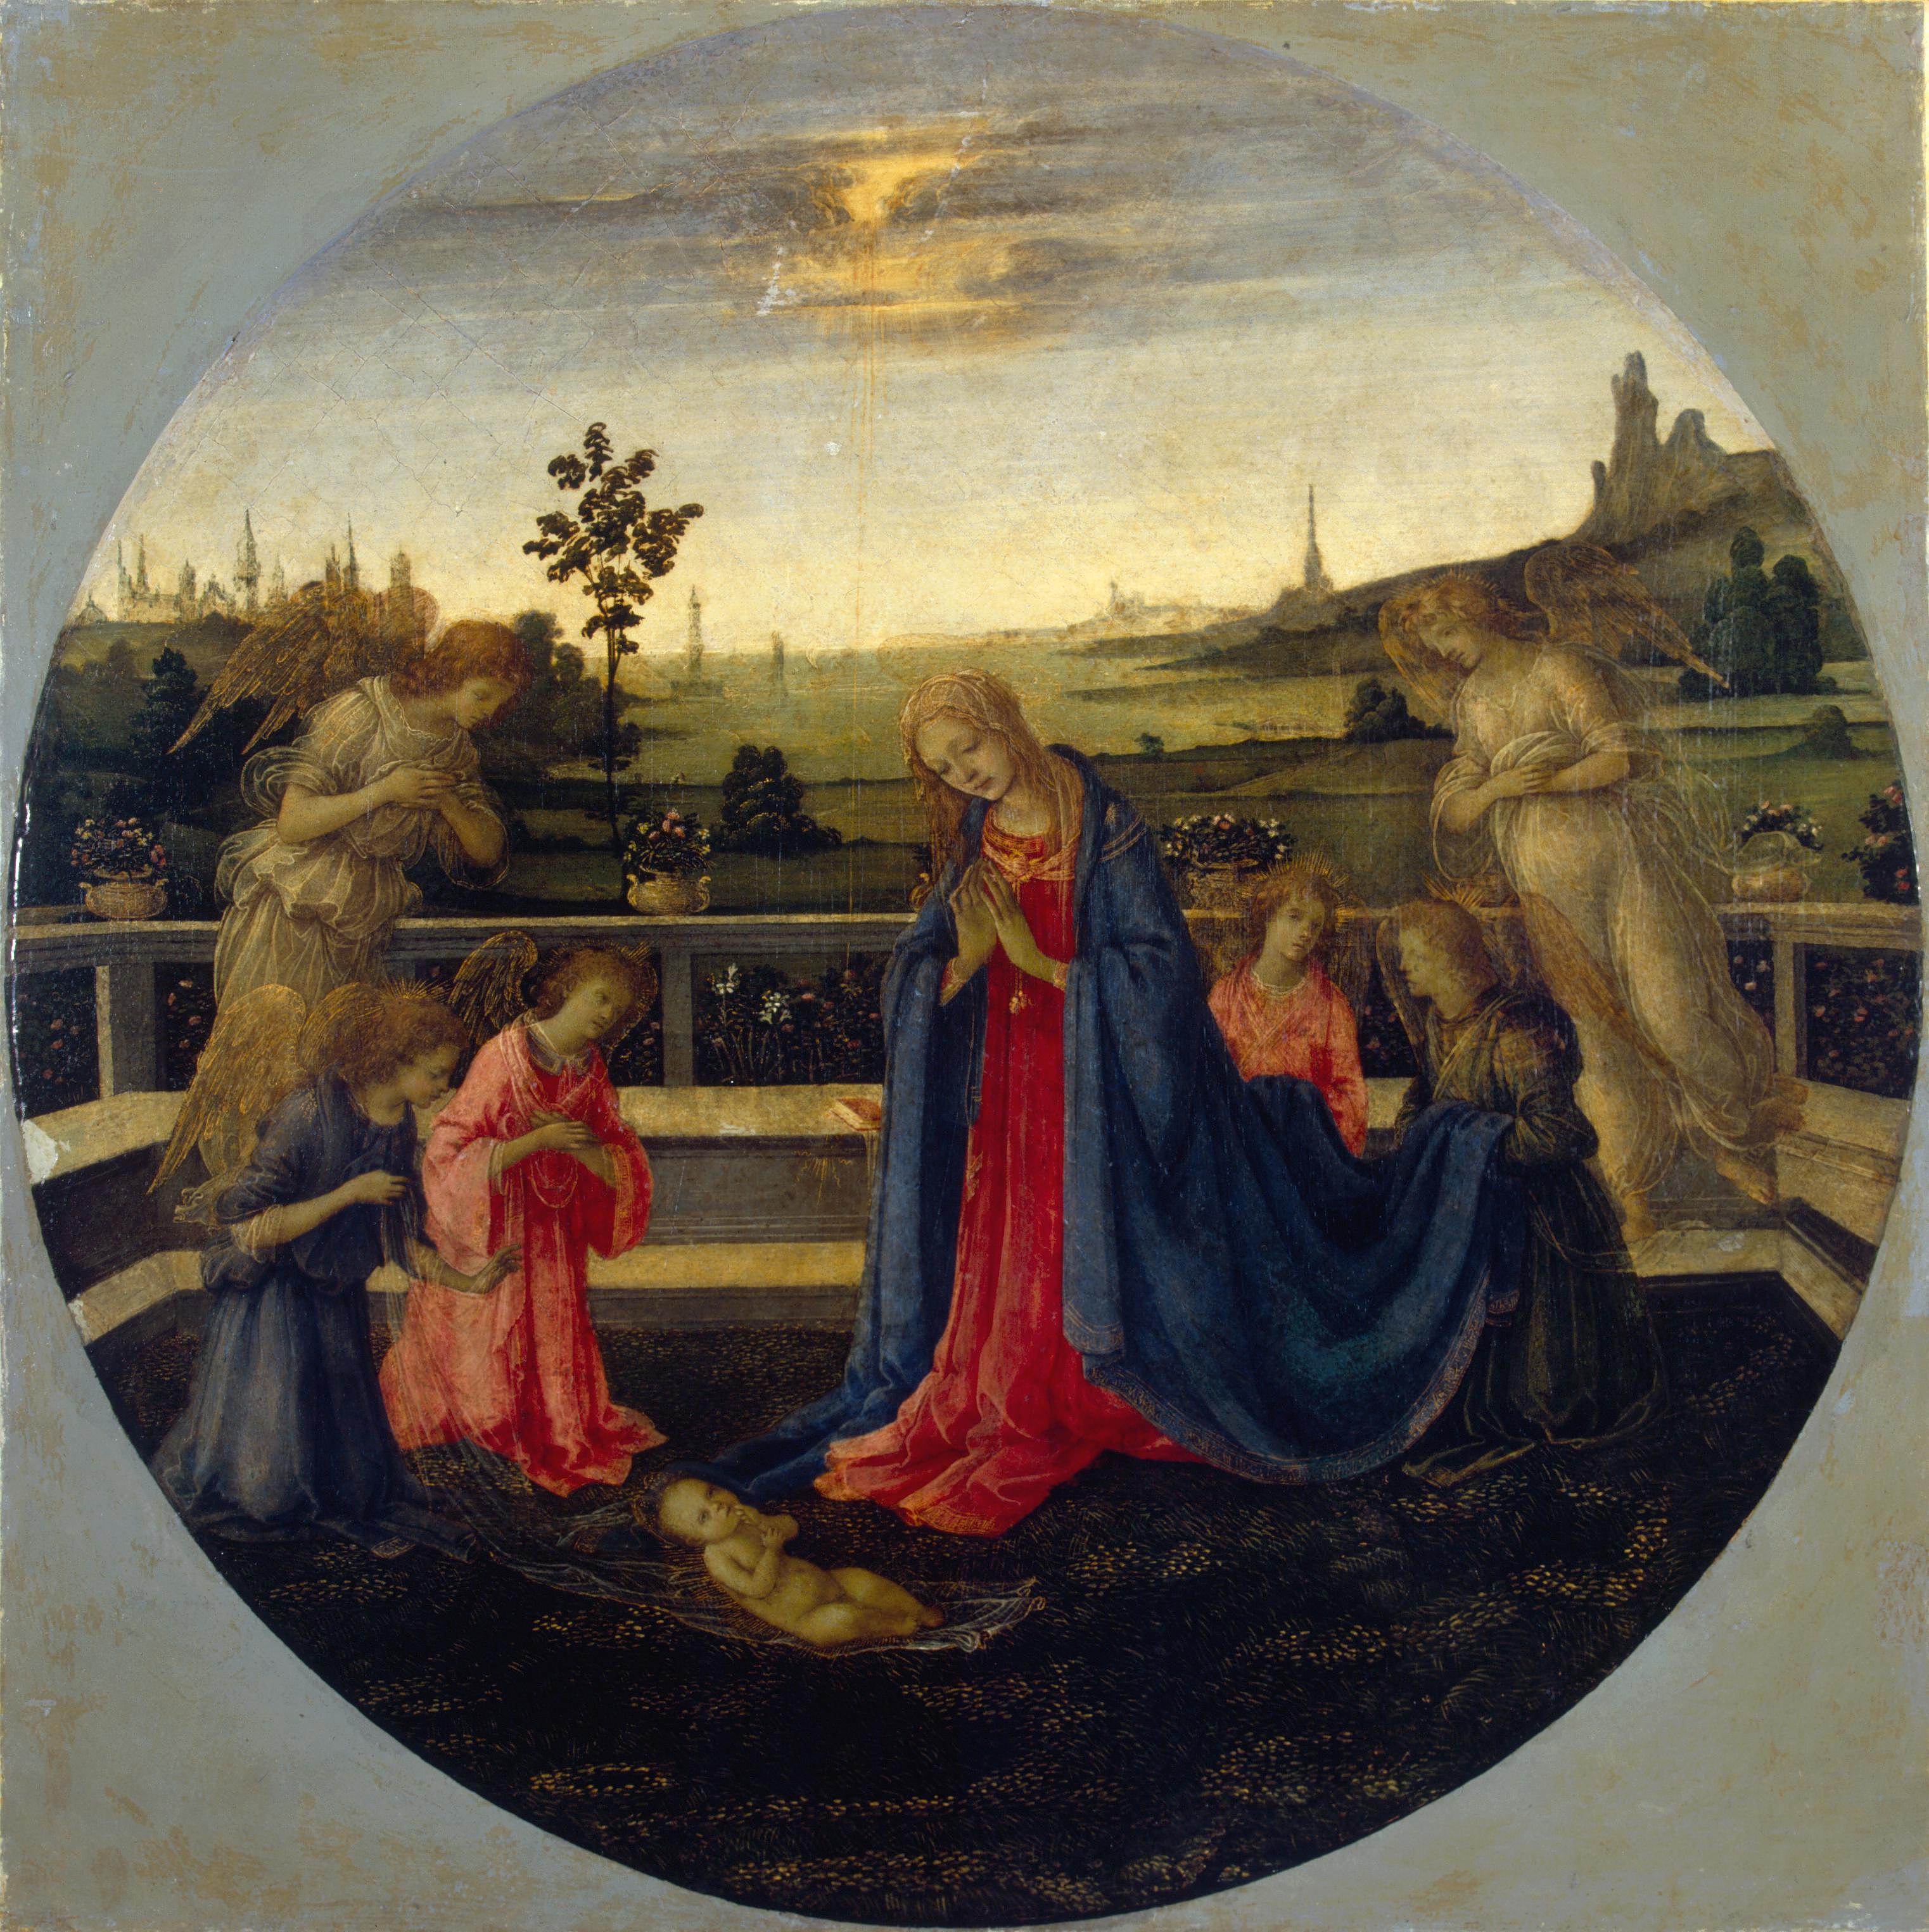 Lippi, Filippino Adoration of the Christ Child Italy, Middle of the 1480s Filippino Lippi was the son of the artist-monk, Fra Filippo Lippi, and himself a pupil of Botticelli. This type of Adoration scene was characteristic of Italian art, being a modification of the scene of the Nativity. Set in a flower-filled meadow surrounded by a balustrade and symbolising Paradise, the scene unfolds before a poetic landscape which seems to be filled with a golden light filtering through the atmosphere. Filippino was one of the first Italian artists to create a landscape in keeping with the mood and appearance of the heroes, creating an inspired emotional setting for them. In the fragile and ethereal Madonna and in the translucent figures of the angels we can feel the mystic exaltation characteristic of Florentine spiritual life in the late 15th century. From 1859 the picture was in Count P.S. Stroganov?s collection, who had identified it and bequeathed it to the Hermitage. 